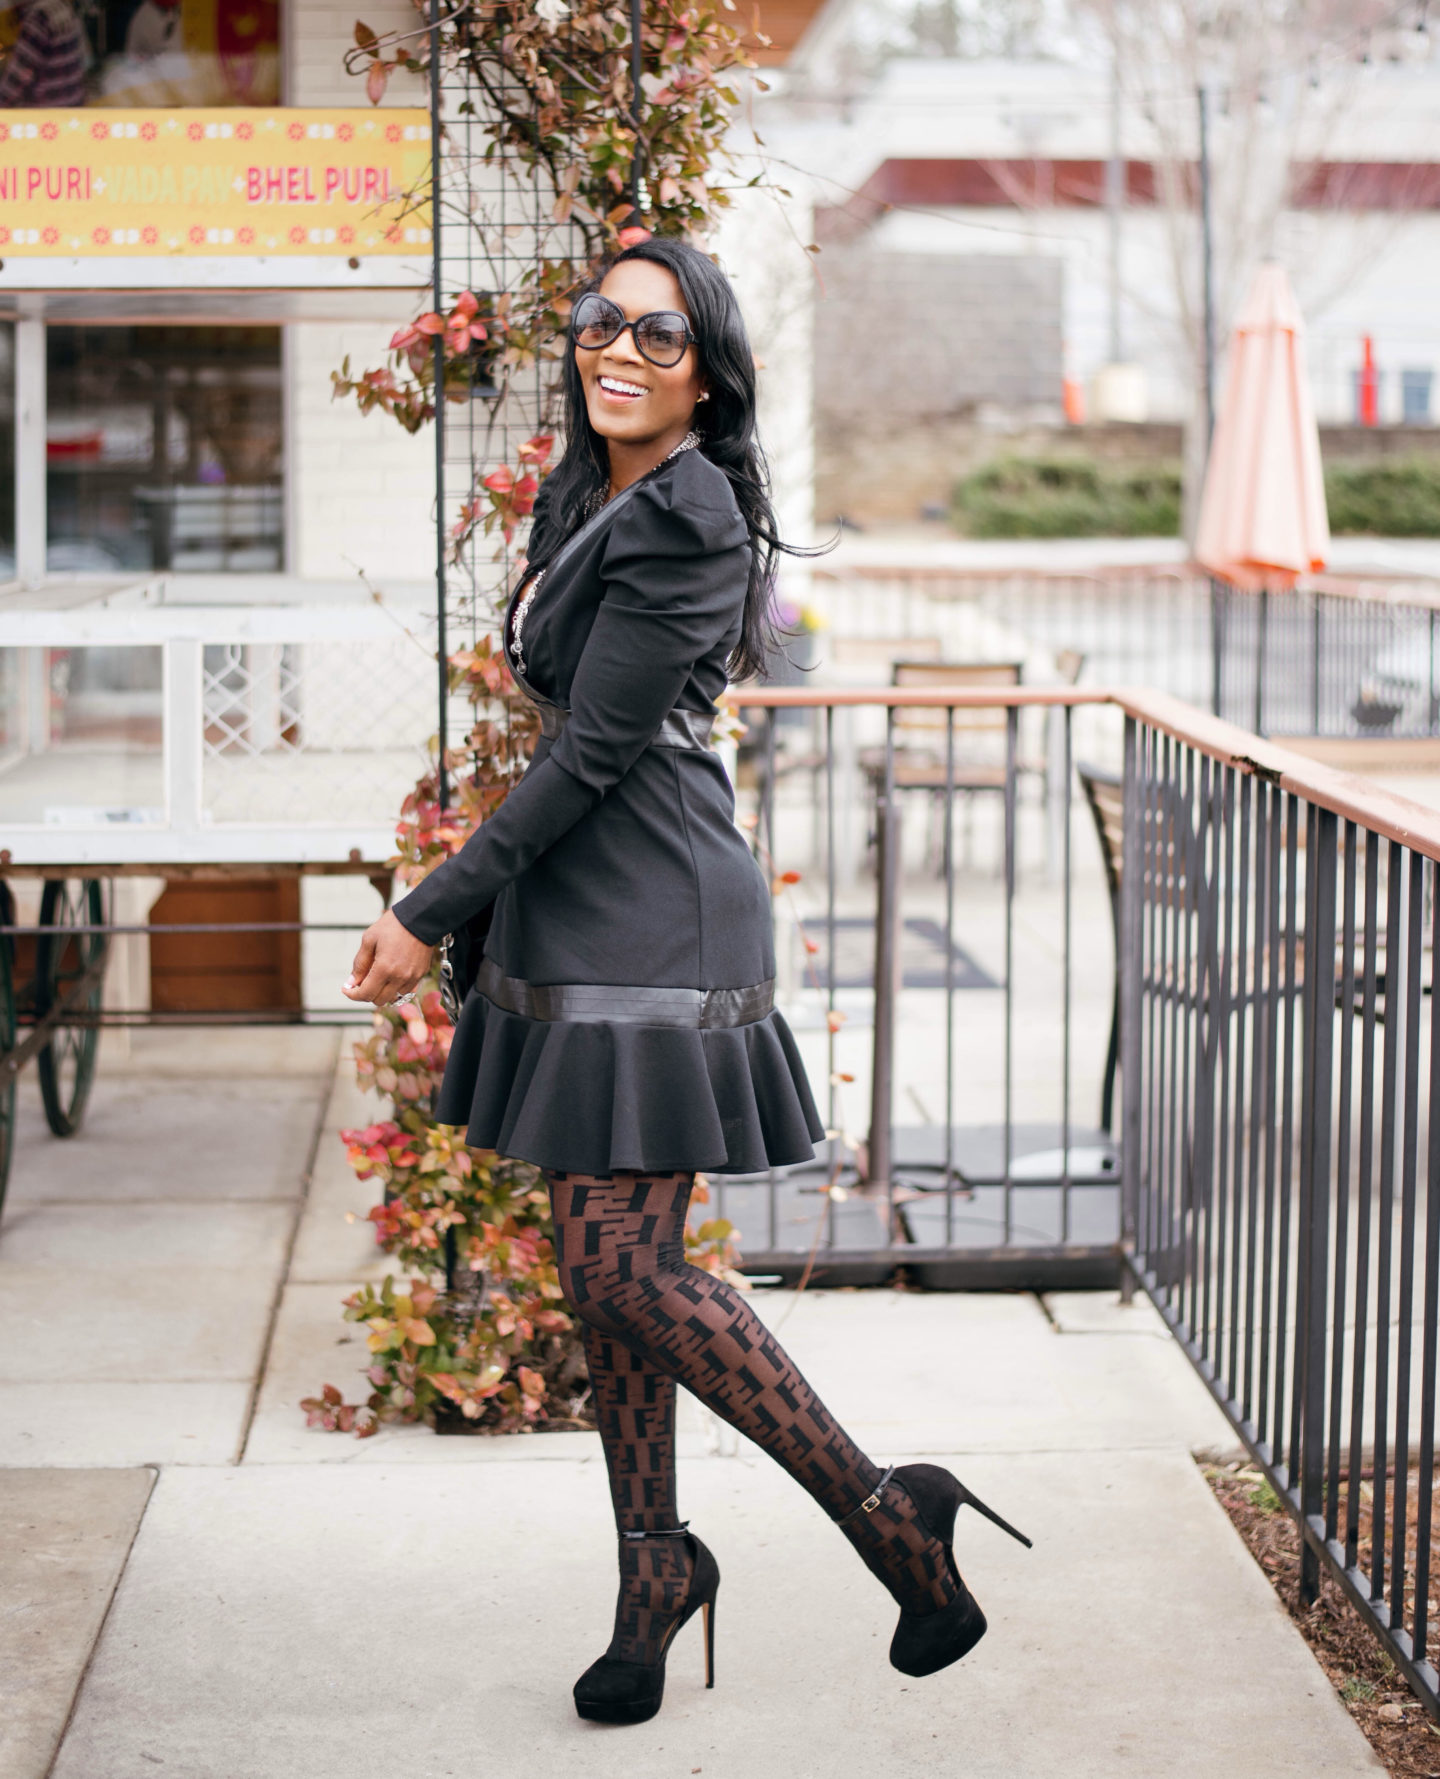 How to wear tights with that little black dress - Fashionmylegs